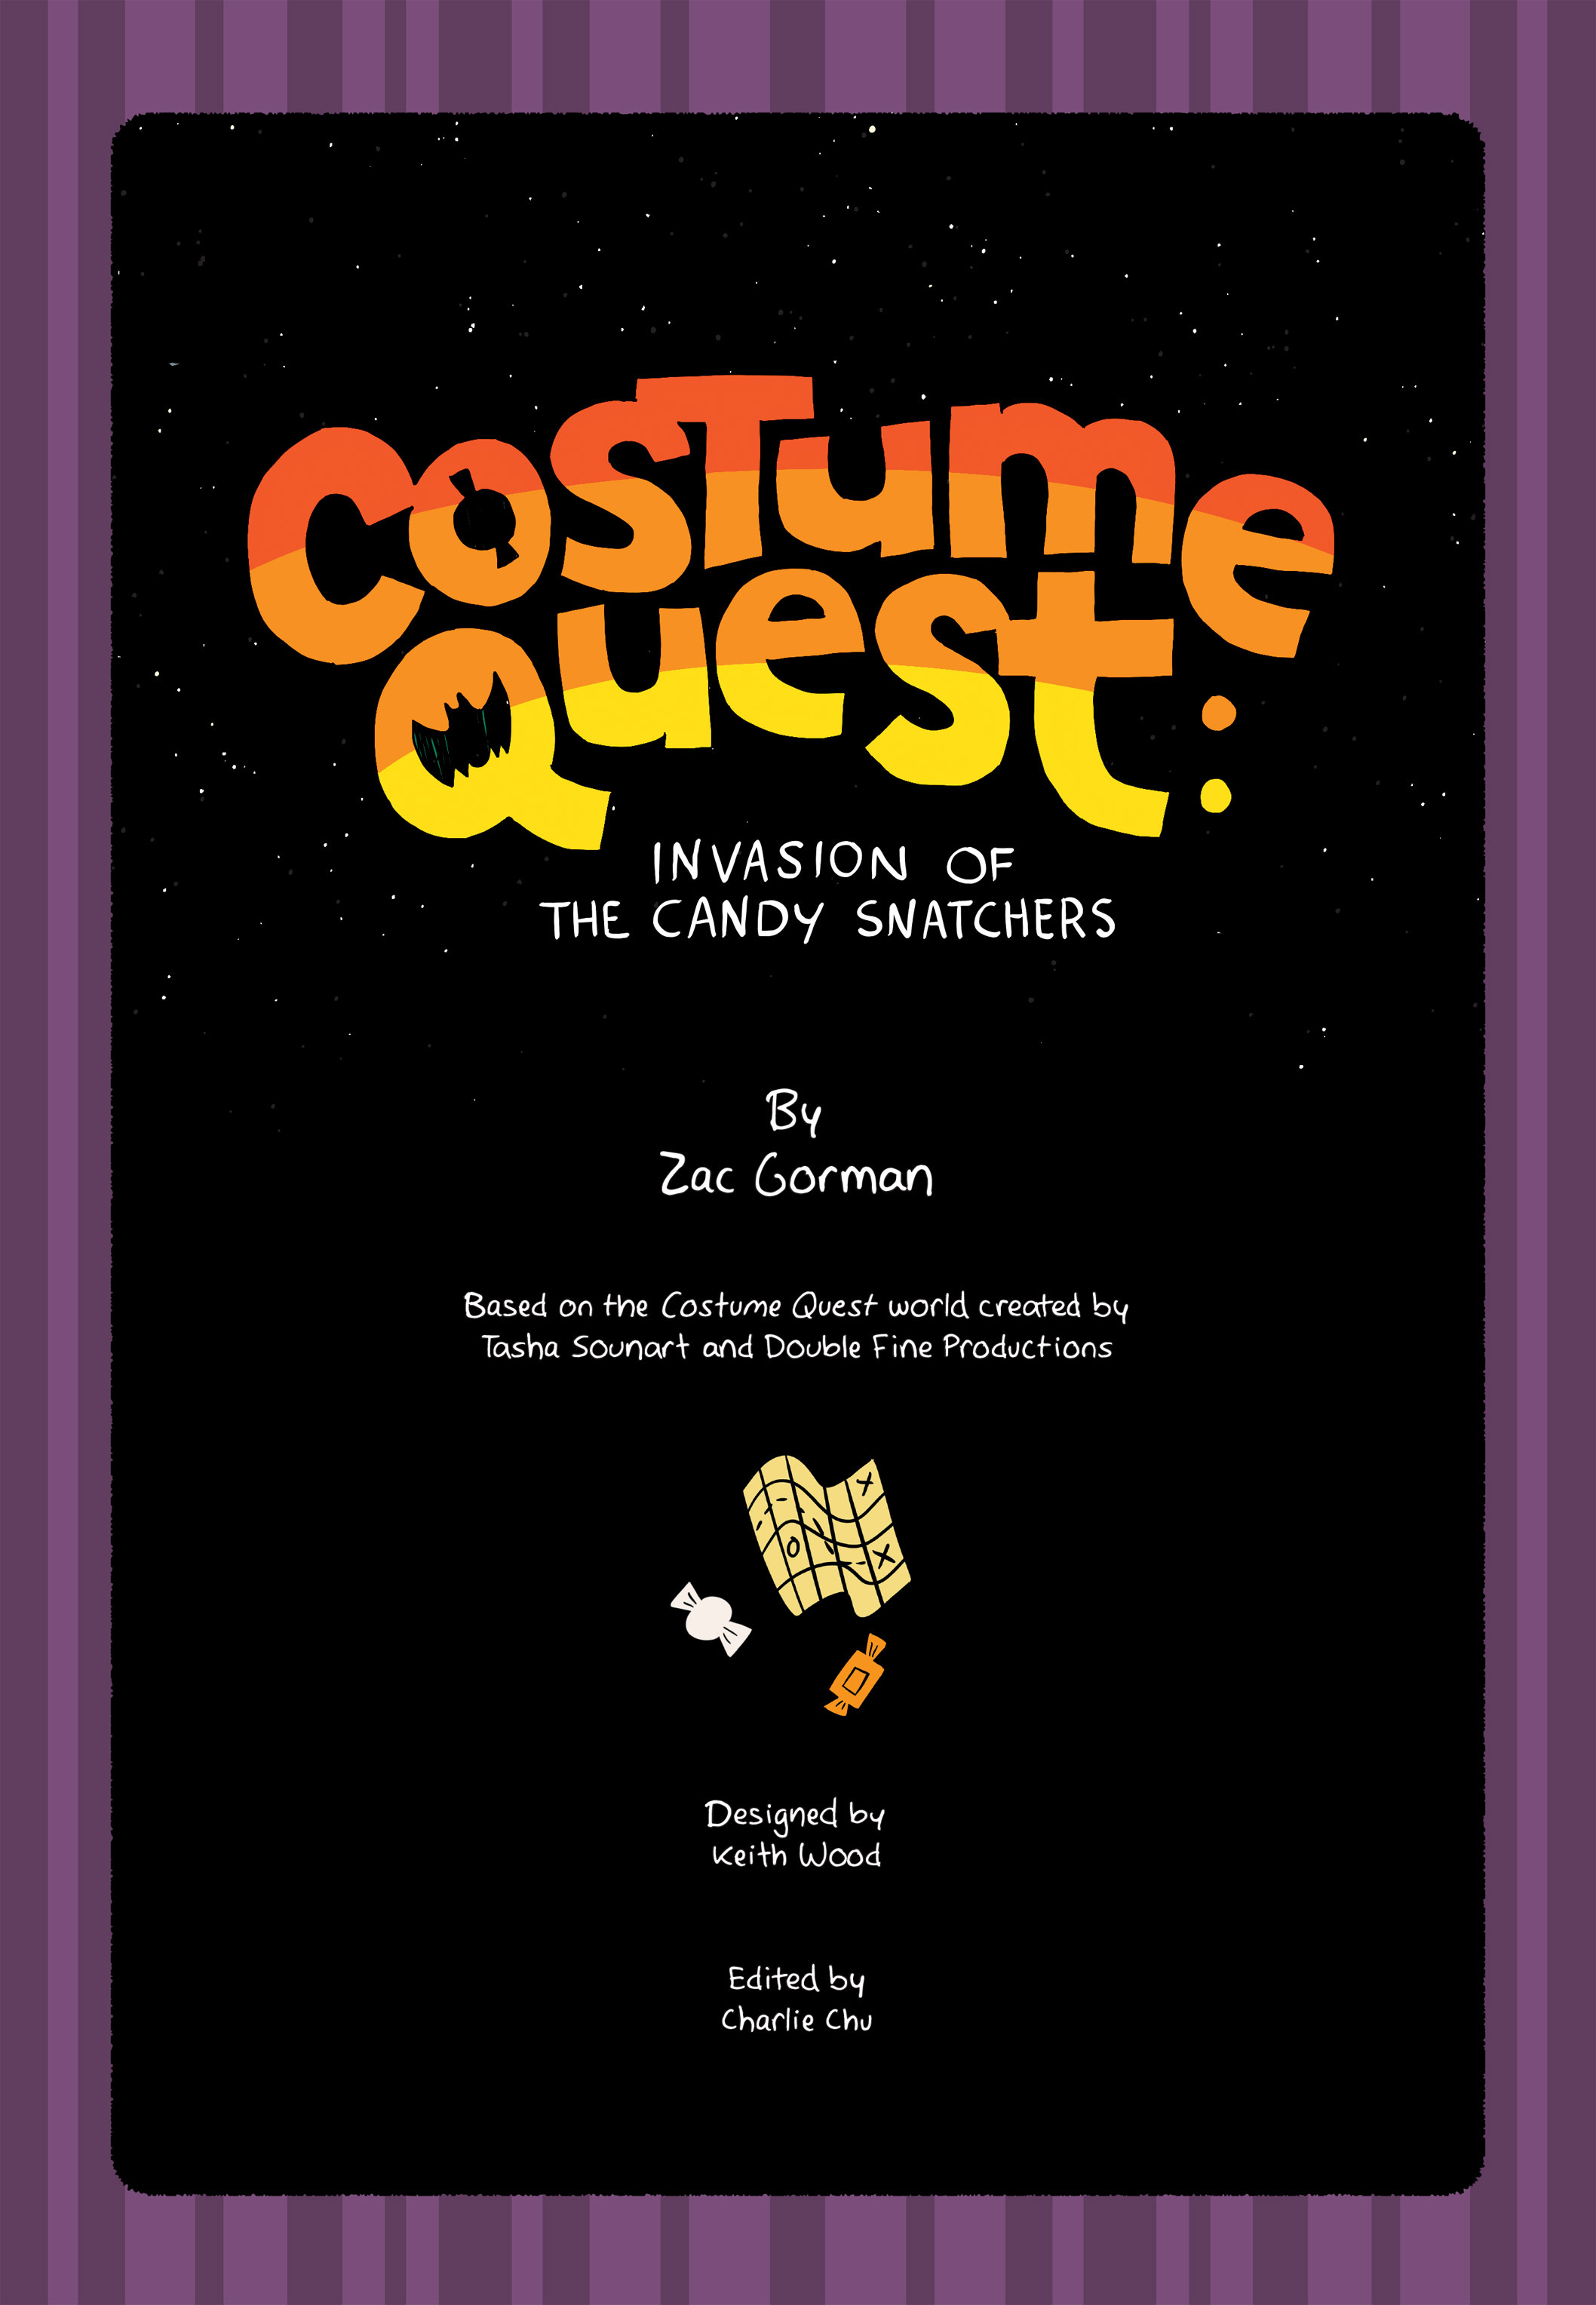 Read online Costume Quest: Invasion of the Candy Snatchers comic -  Issue # Full - 3